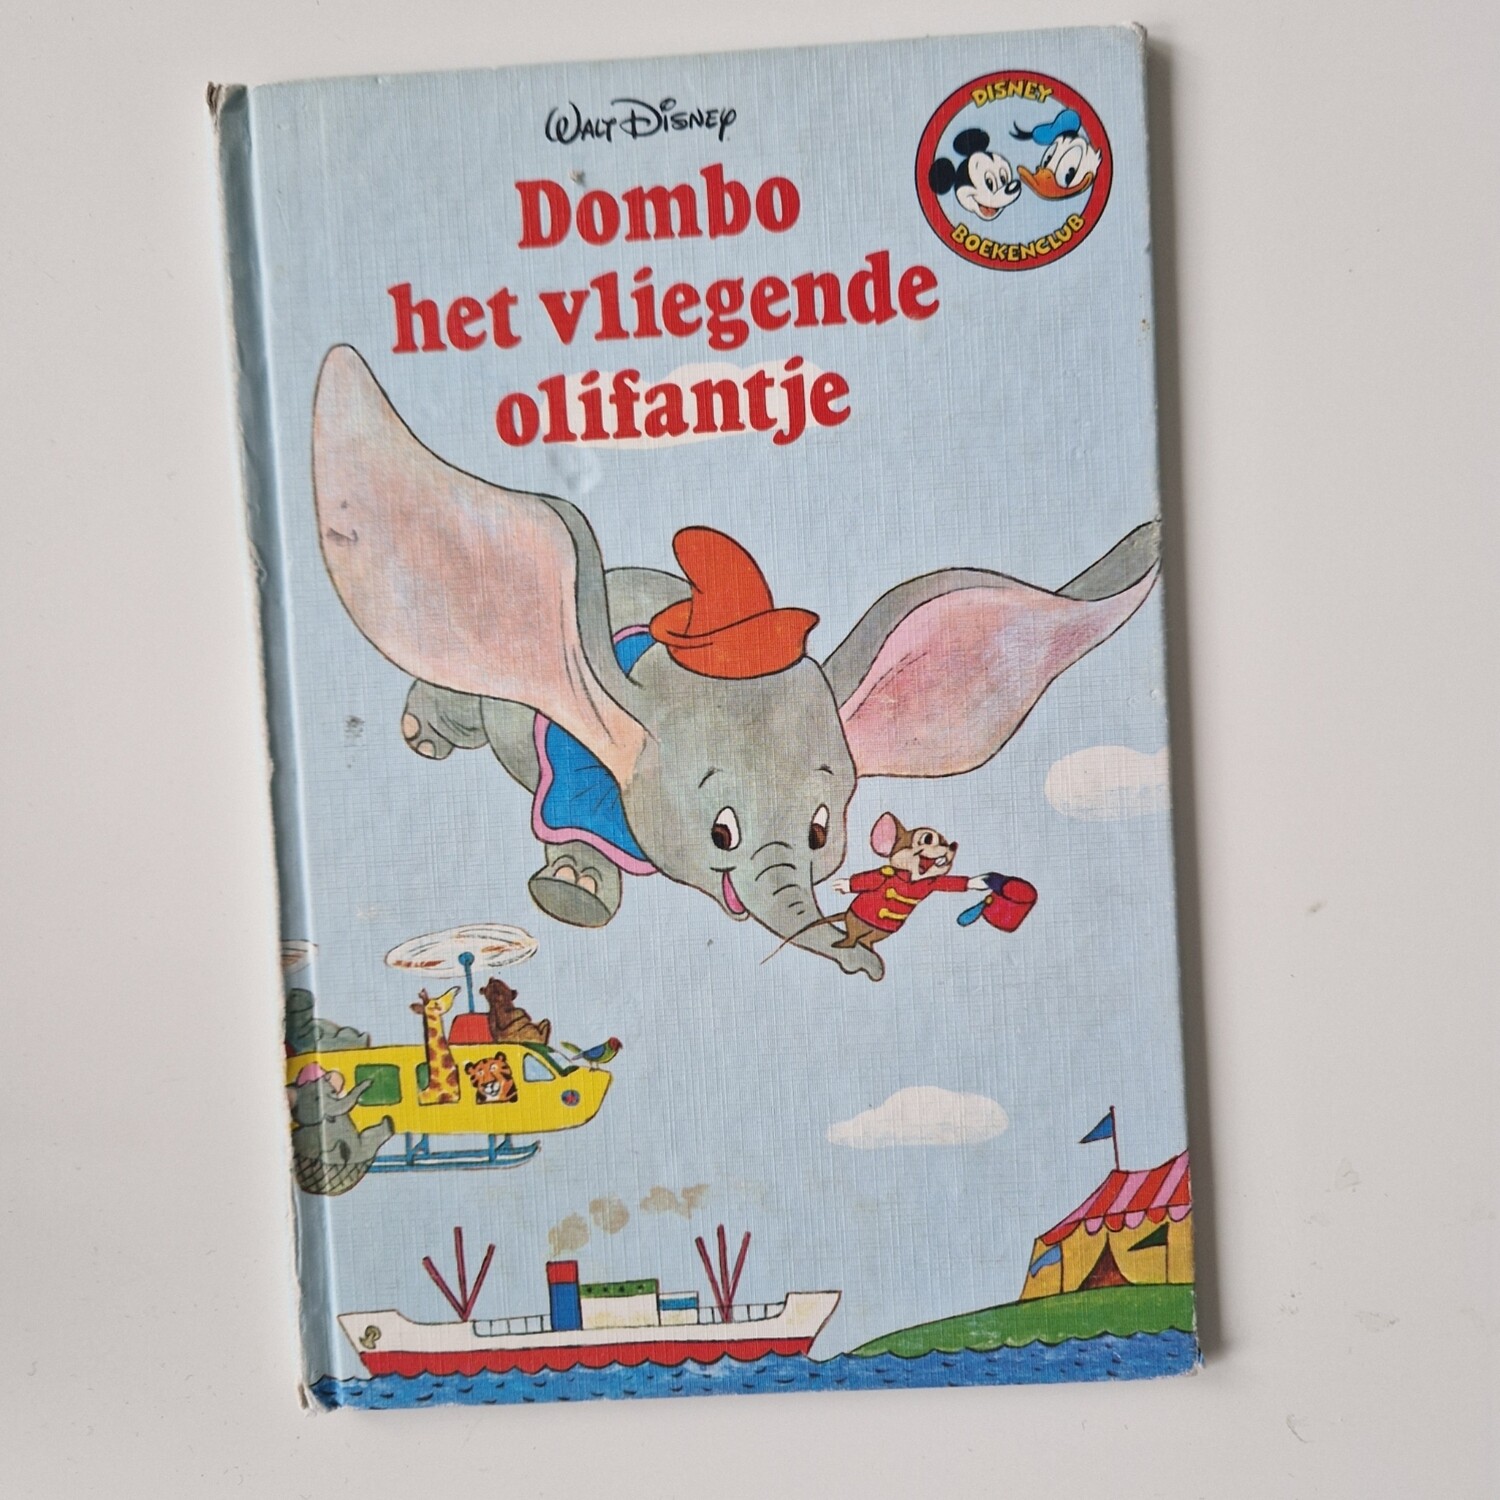 Dumbo the Flying Elephant Notebook - Dutch - no original book pages